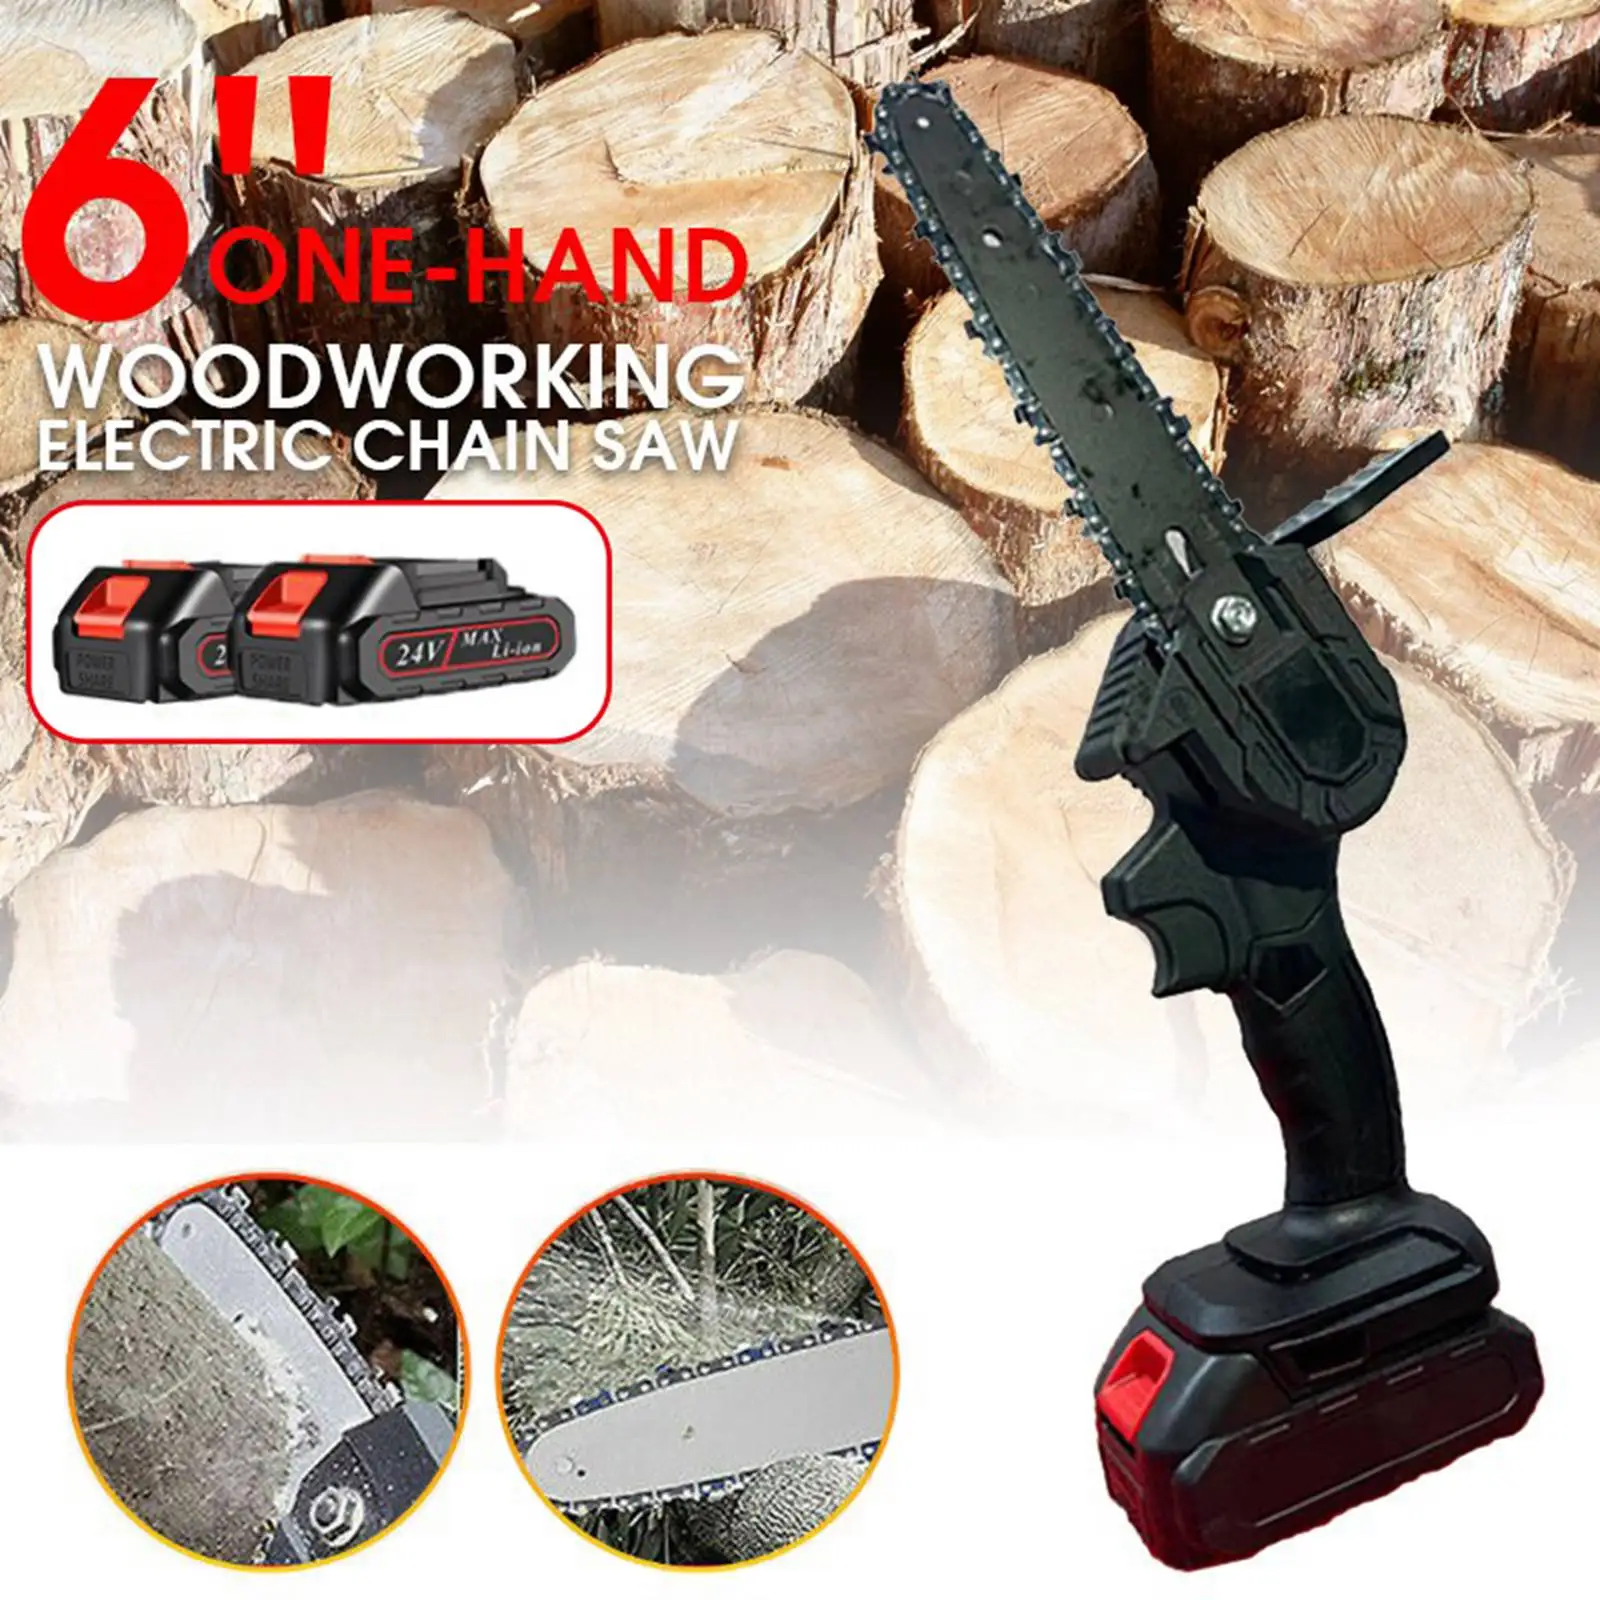 Electric Chainsaw Wood Cutter Cordless For Makita 18v Batterye Lectric Chain Saw Abs+metal 24vf 5m/s